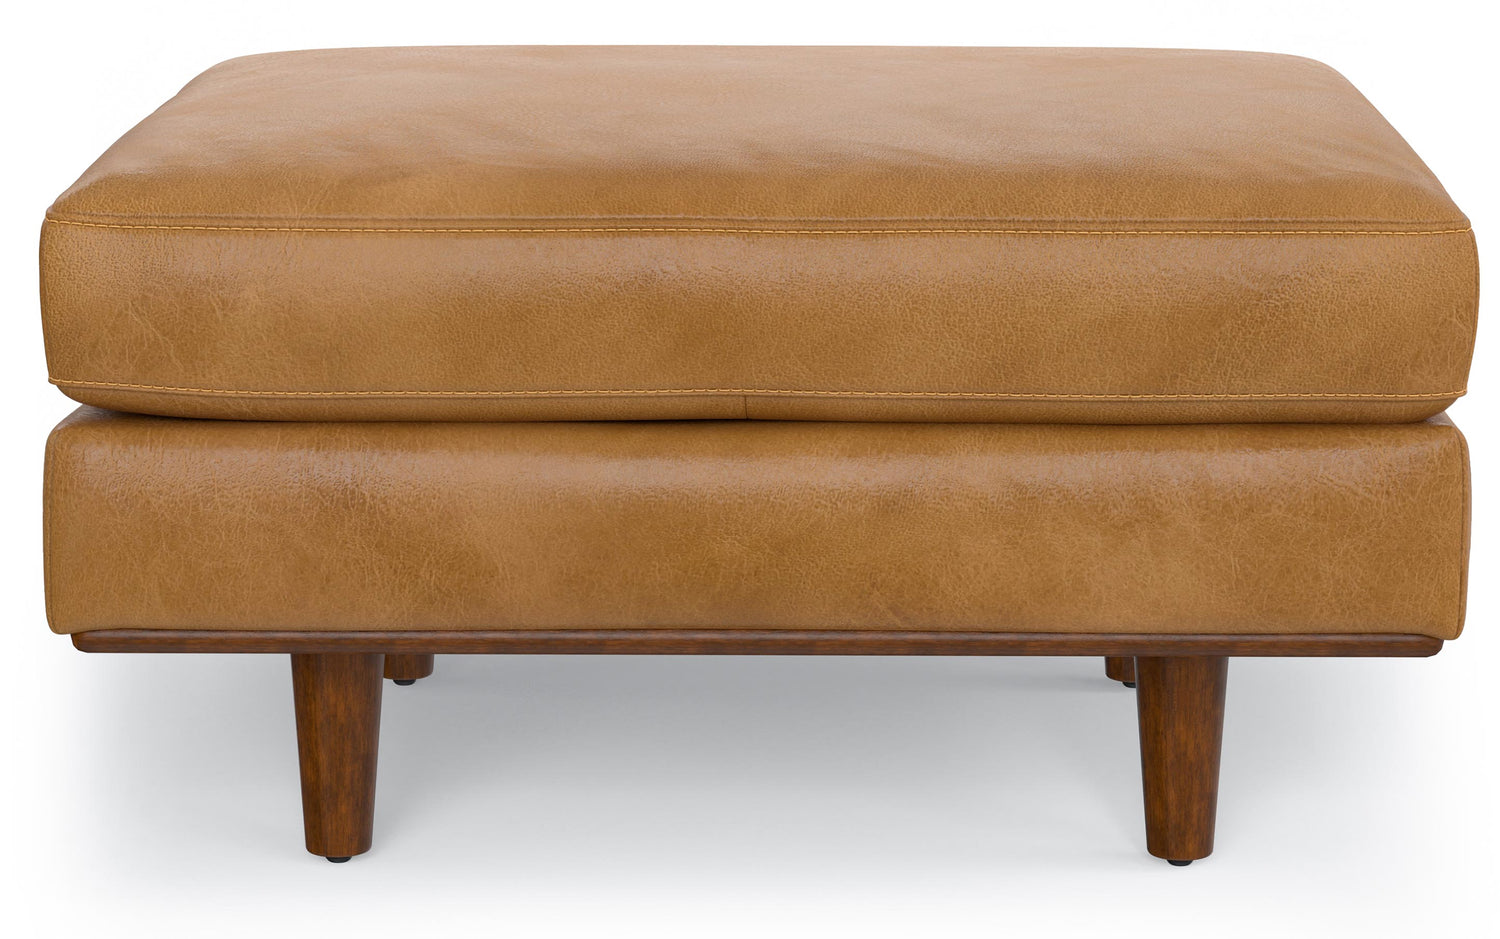 Sienna Genuine Top Grain Leather | Morrison 72-inch Sofa and Ottoman Set in Genuine Leather